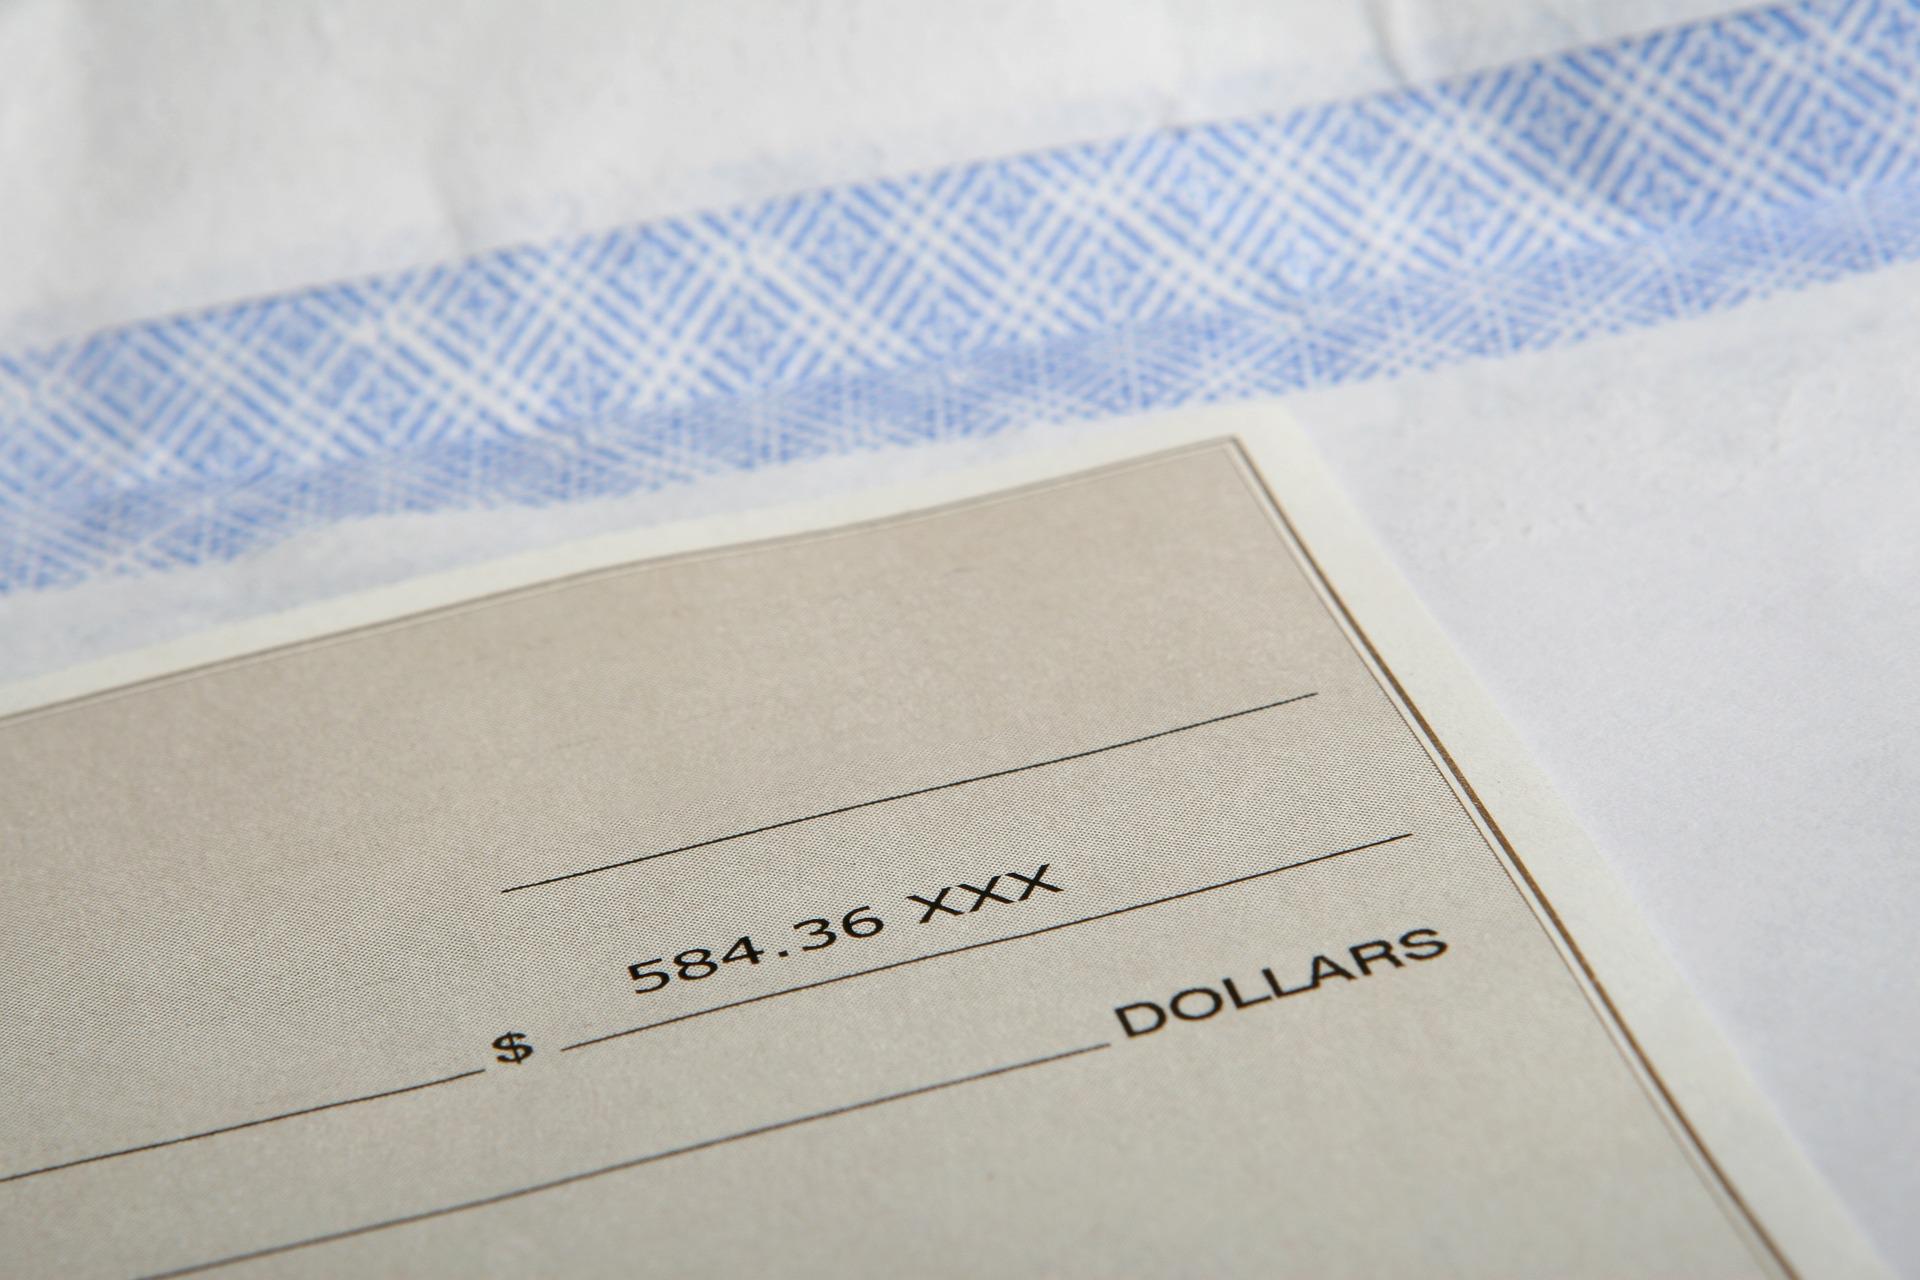 A picture of the upper right corner of a check.